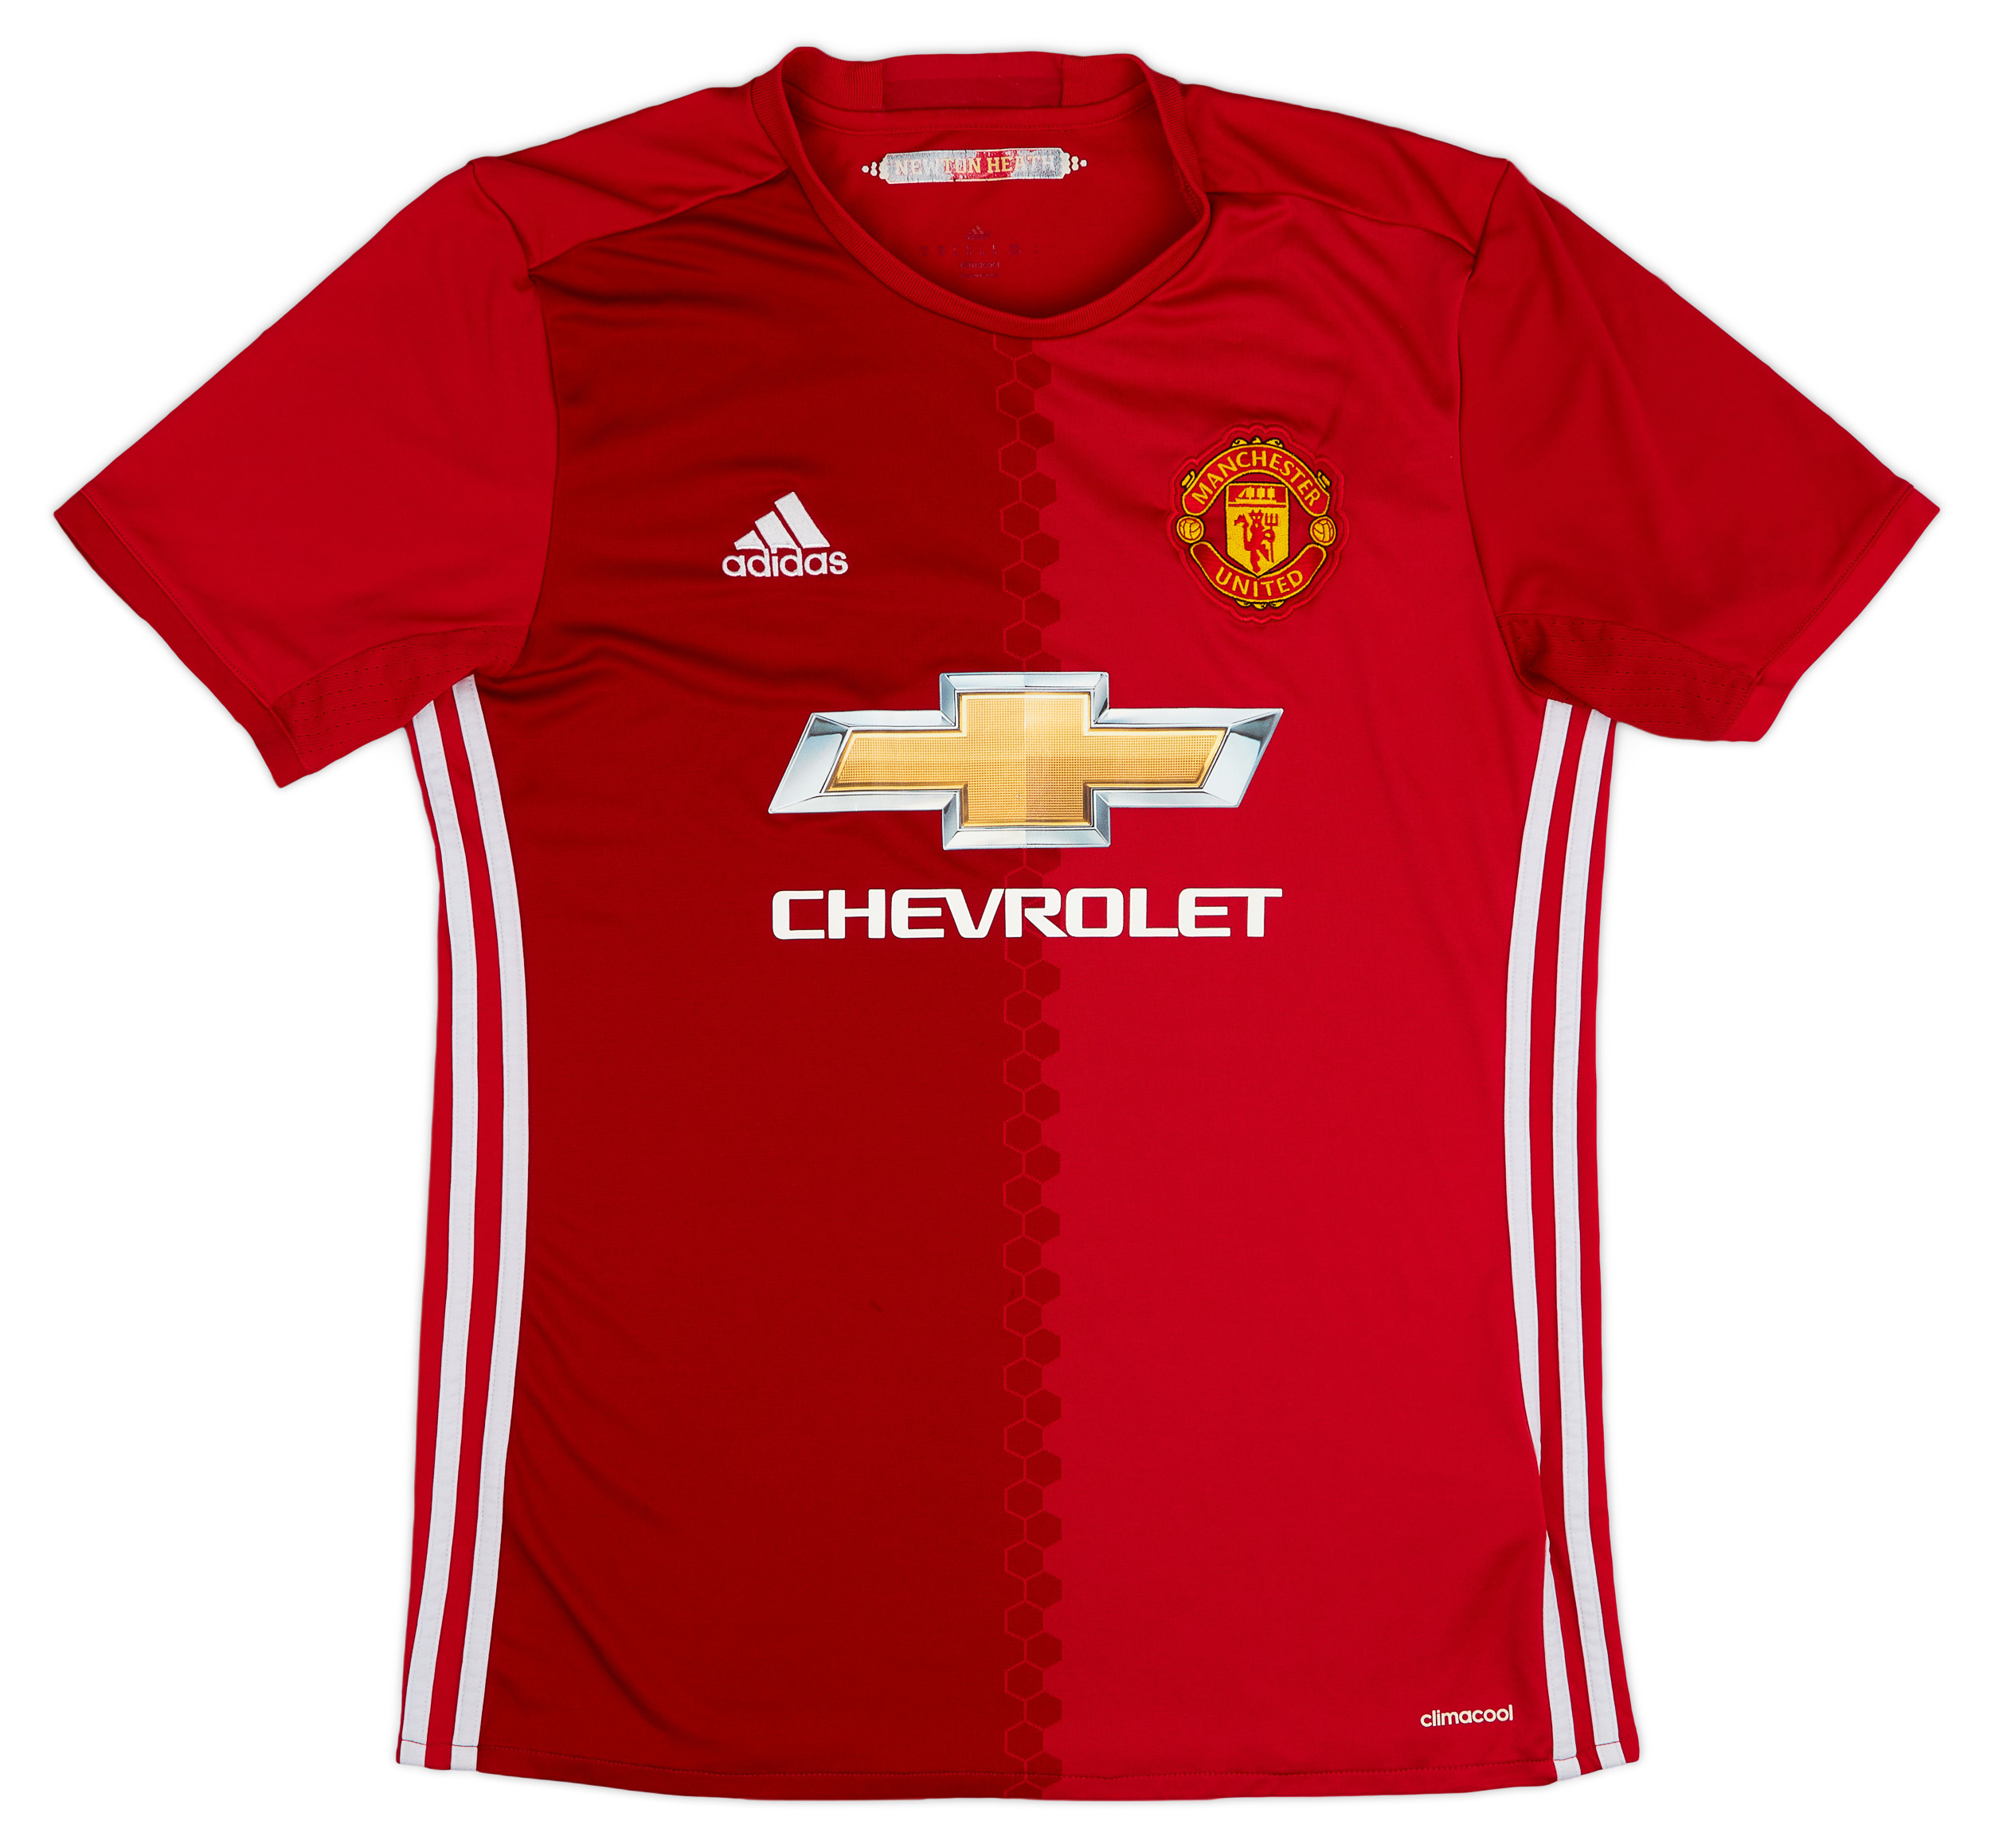 2016-17 Manchester United Home Shirt - Excellent 8/10 - ()